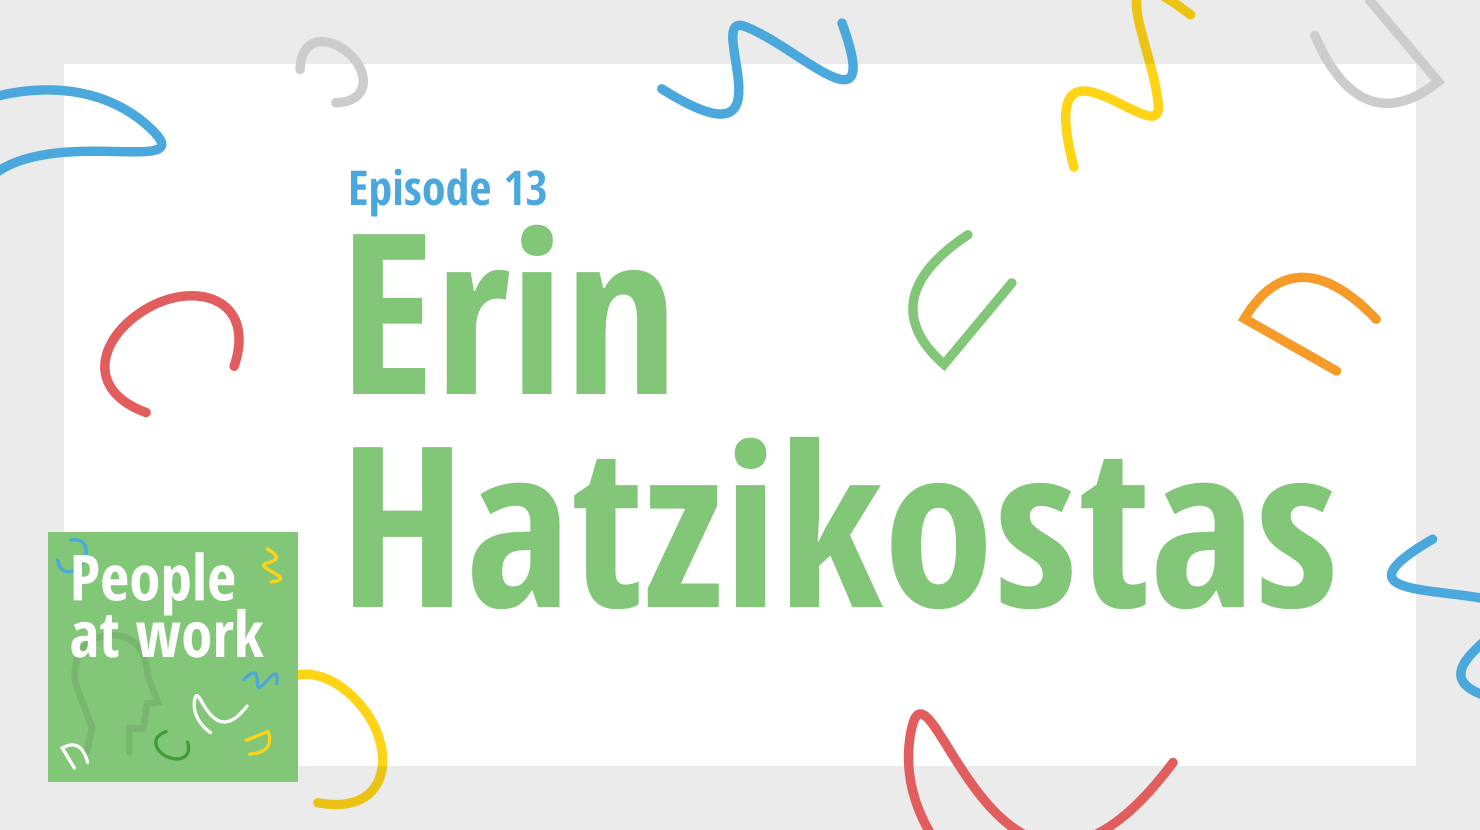 Erin Hatzikostas on being a leader people want to follow